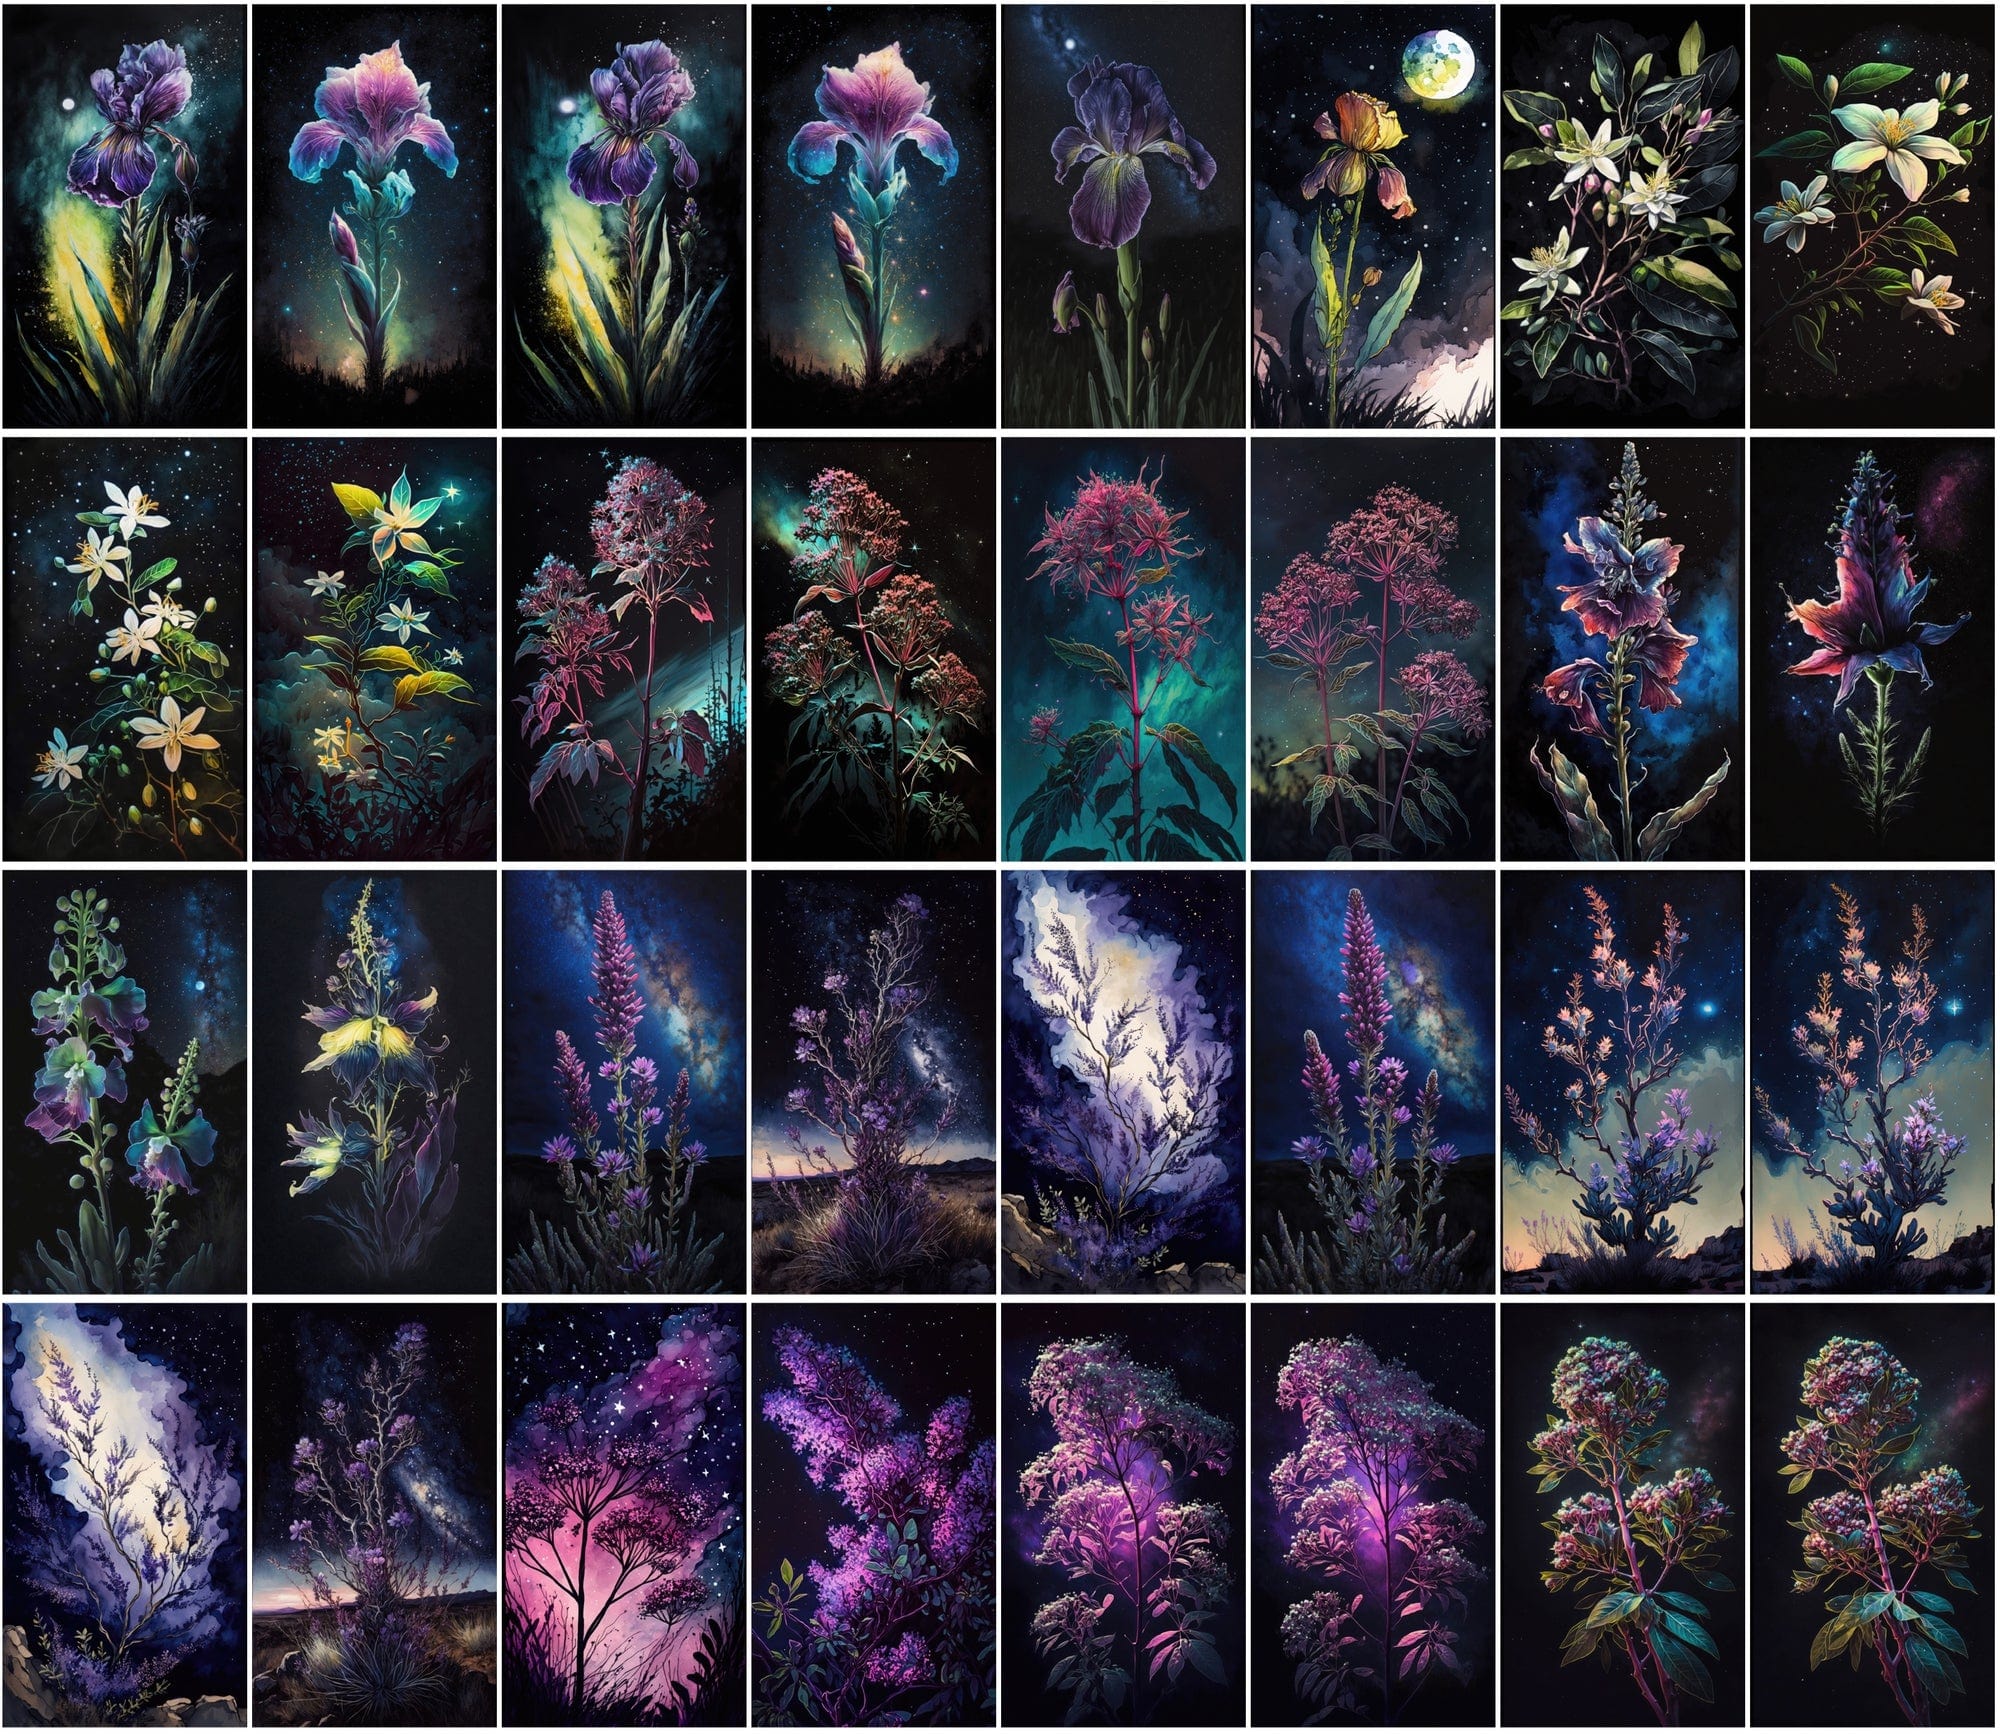 Stunning Floral & Starry Sky Images - High-Resolution, Colorful, Commercial Use - 470 JPG Collection Digital Download Sumobundle